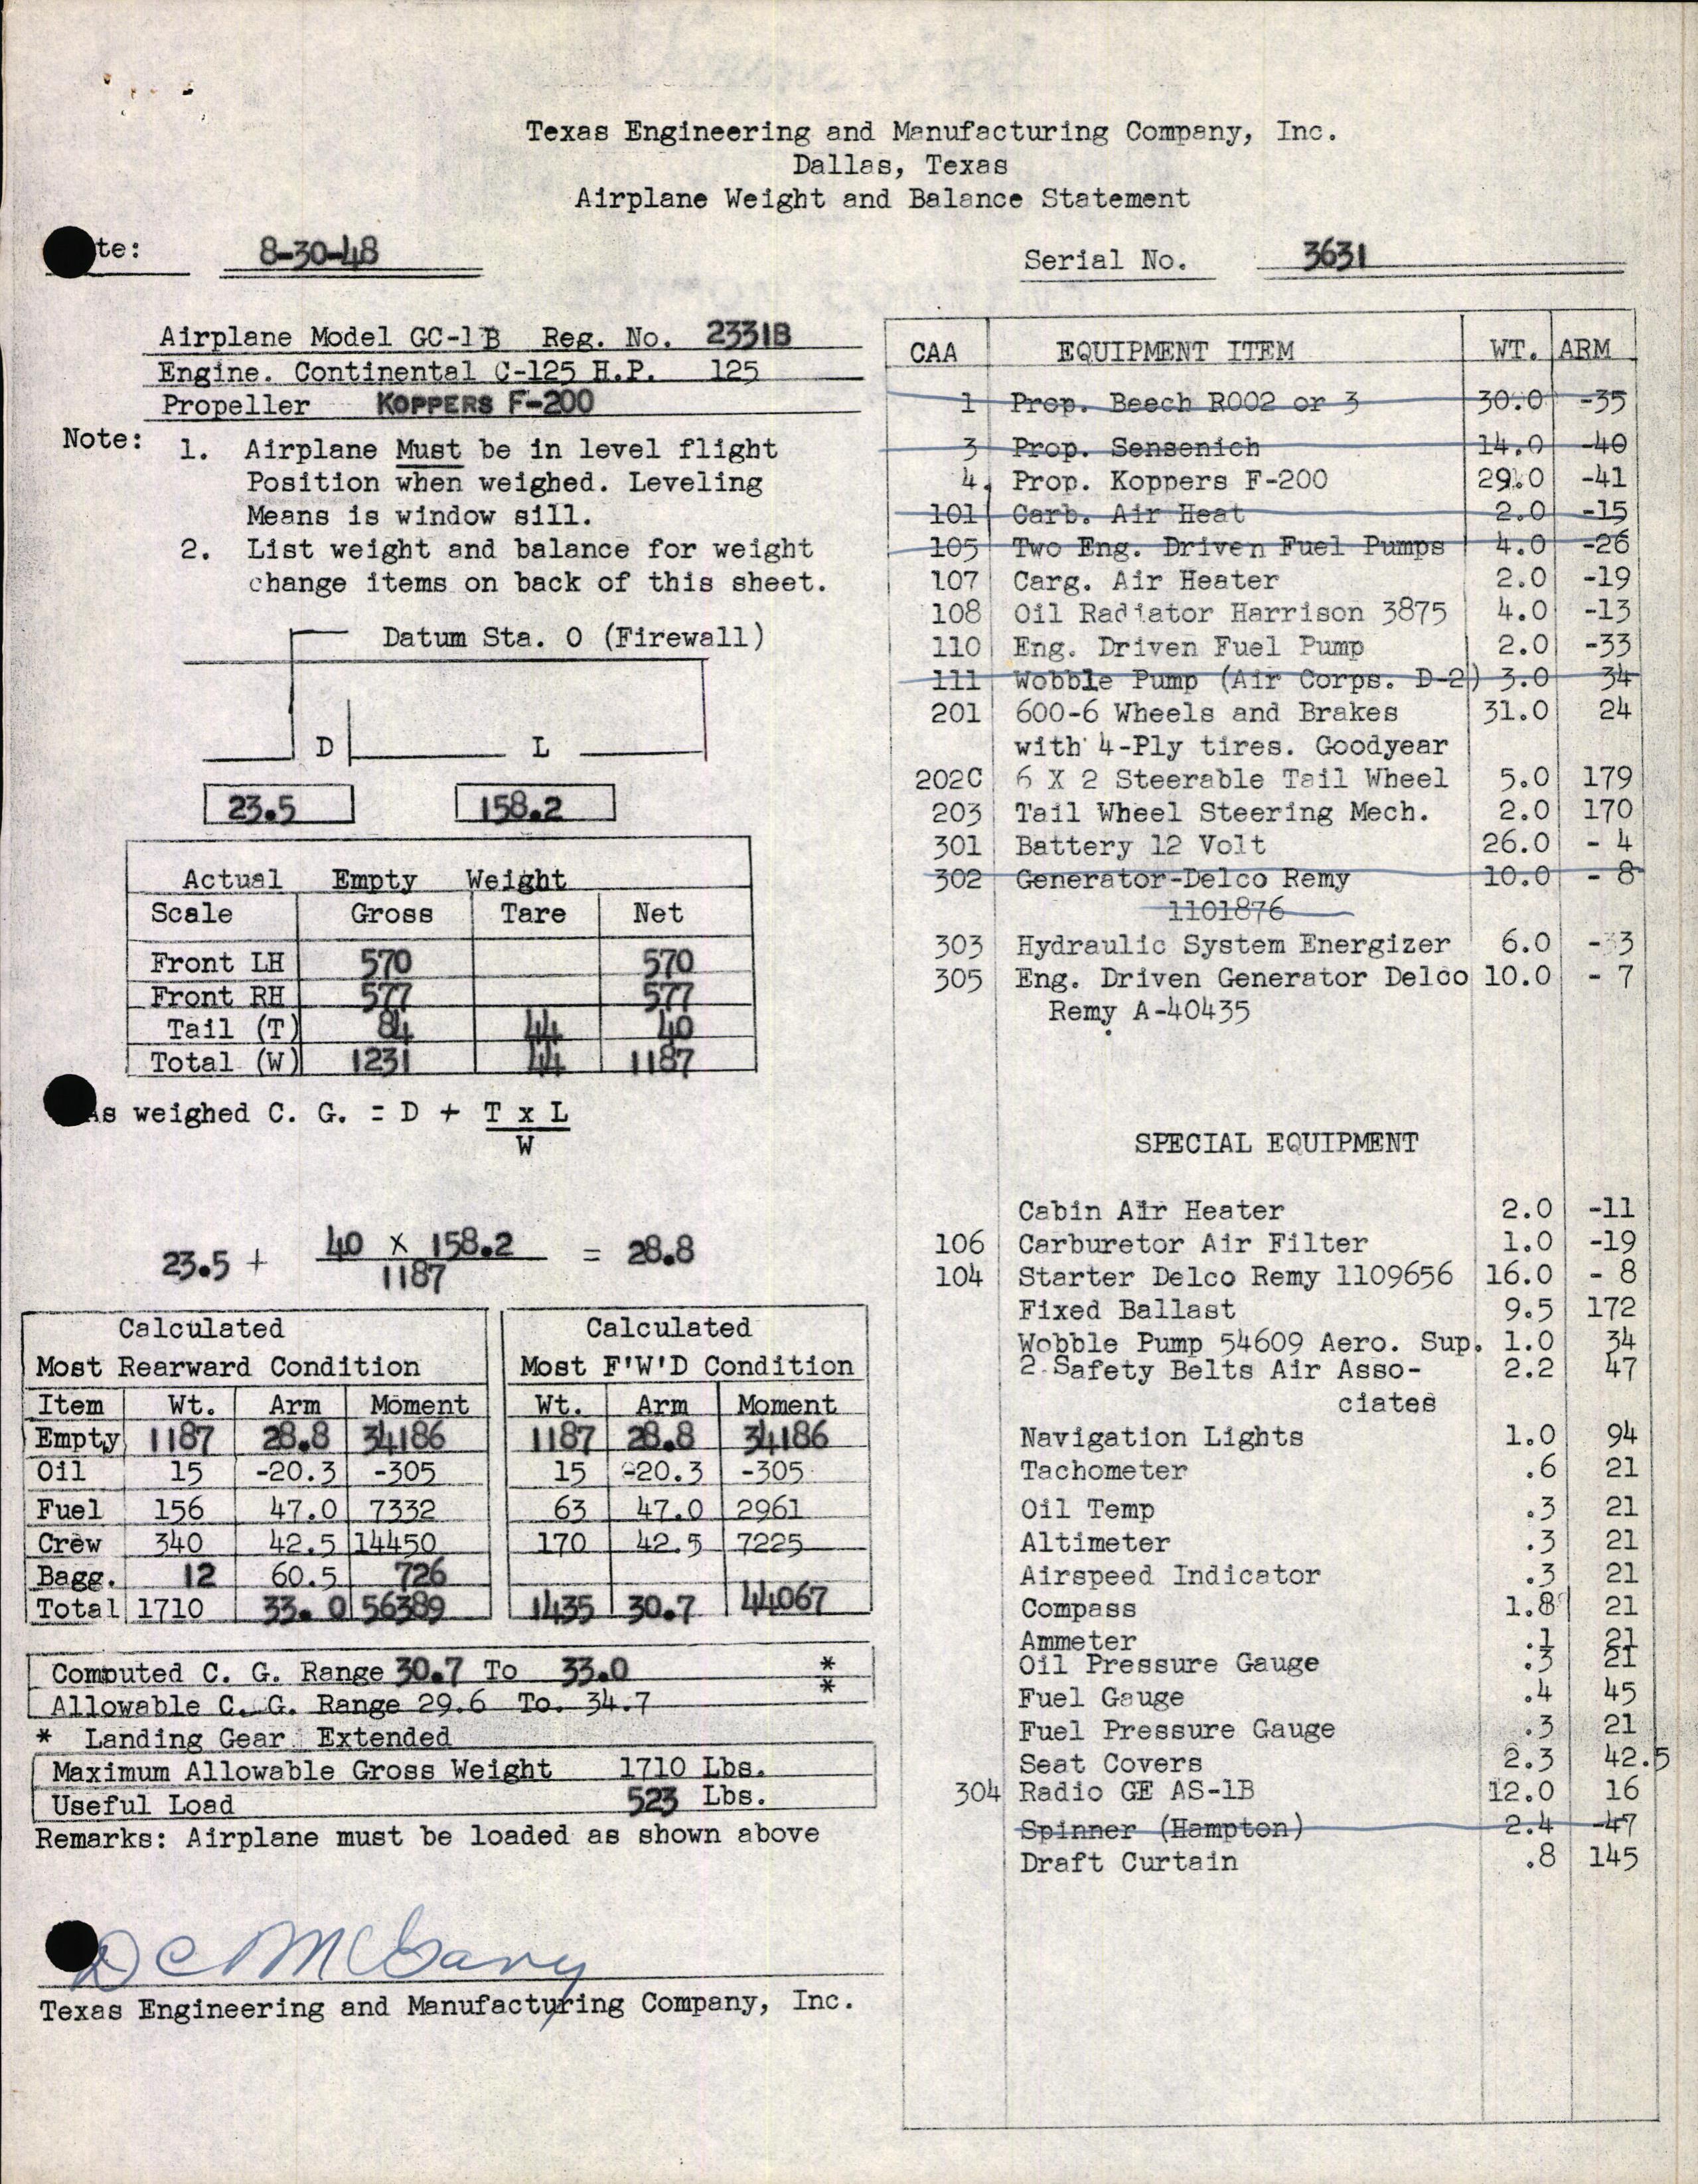 Sample page 4 from AirCorps Library document: Technical Information for Serial Number 3631